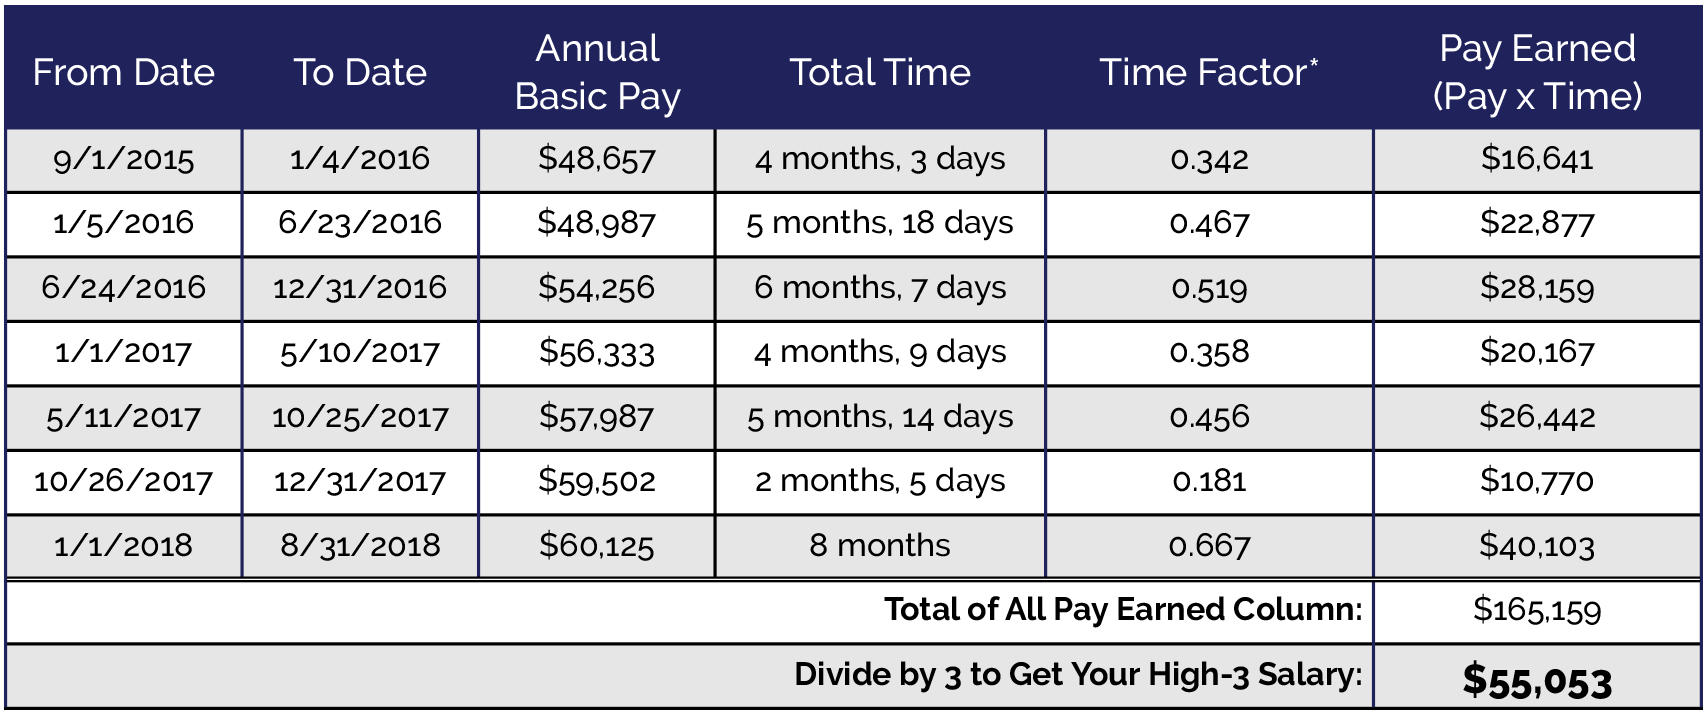 Calculating Your High-3 Salary - United Benefits